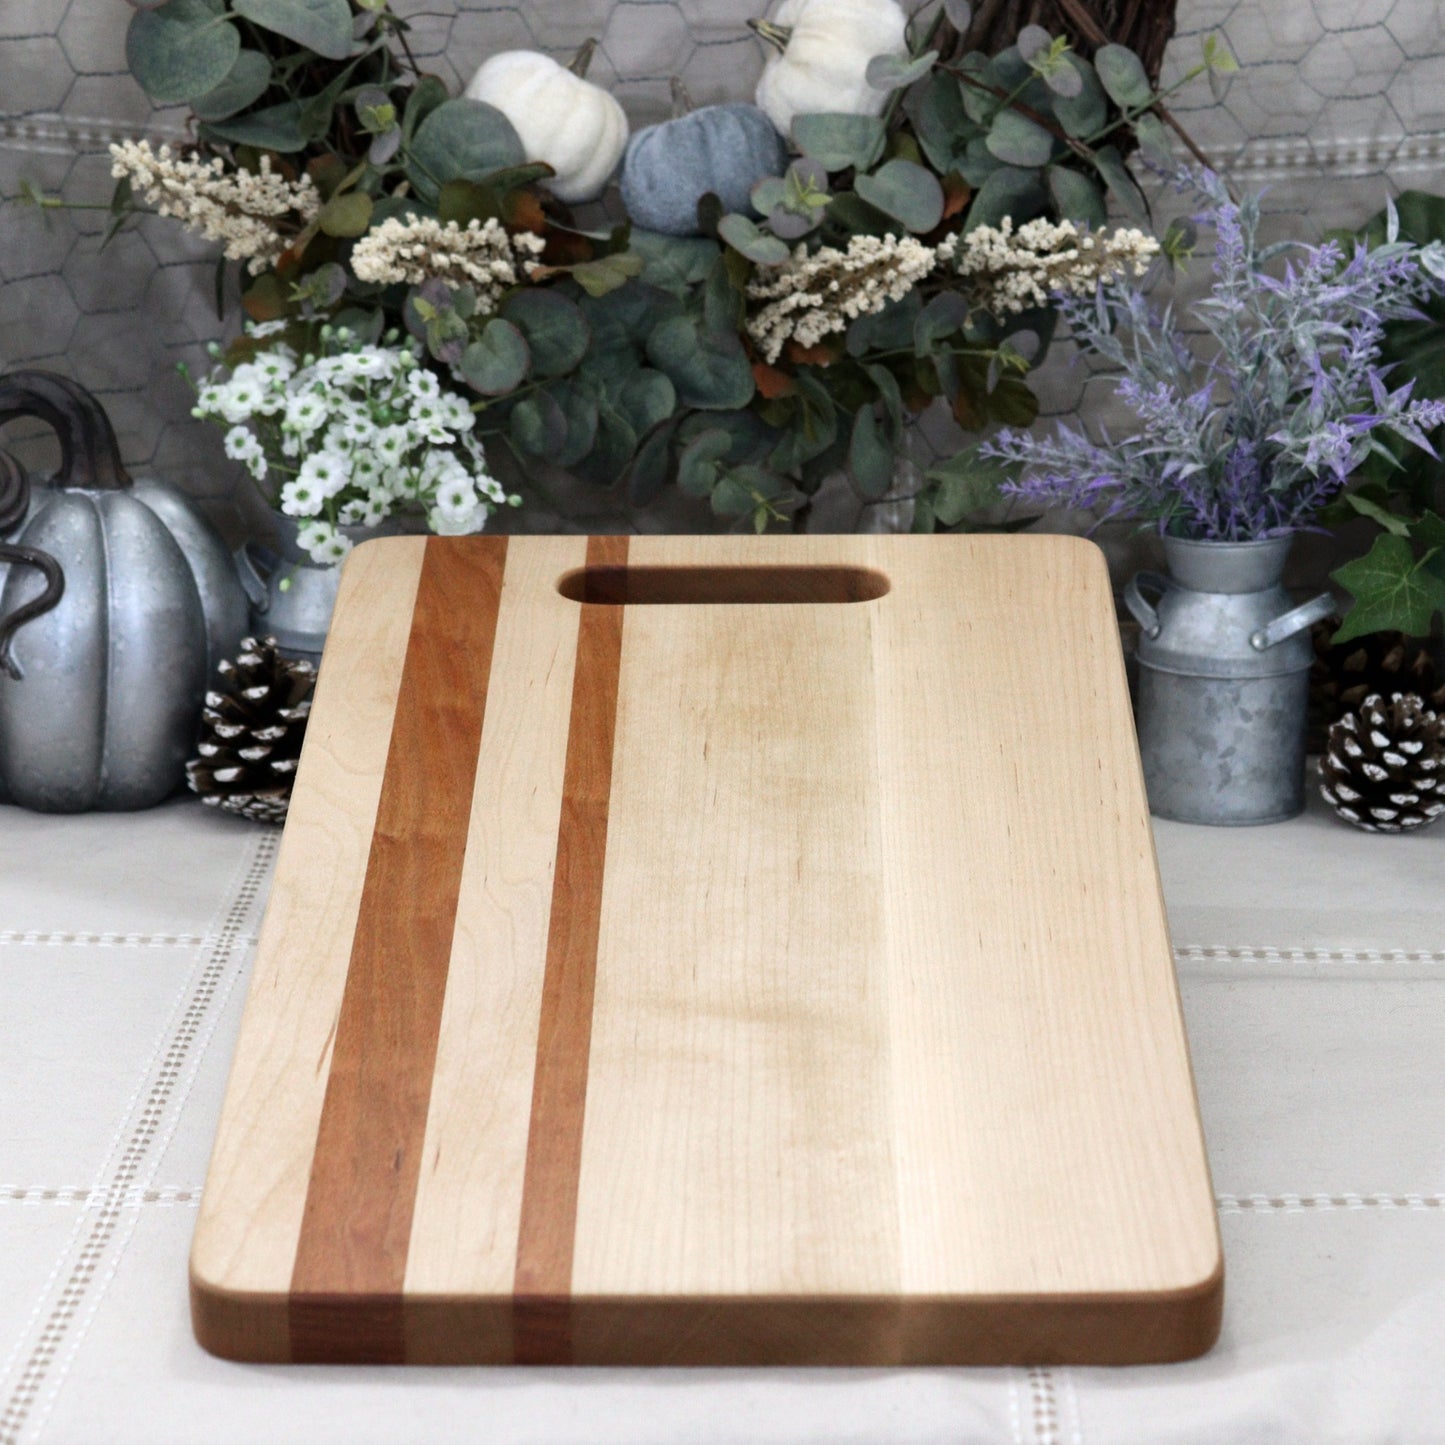 4-PC Maple Wood Tray, Cutting Board, Wine Carrier & Coaster Set